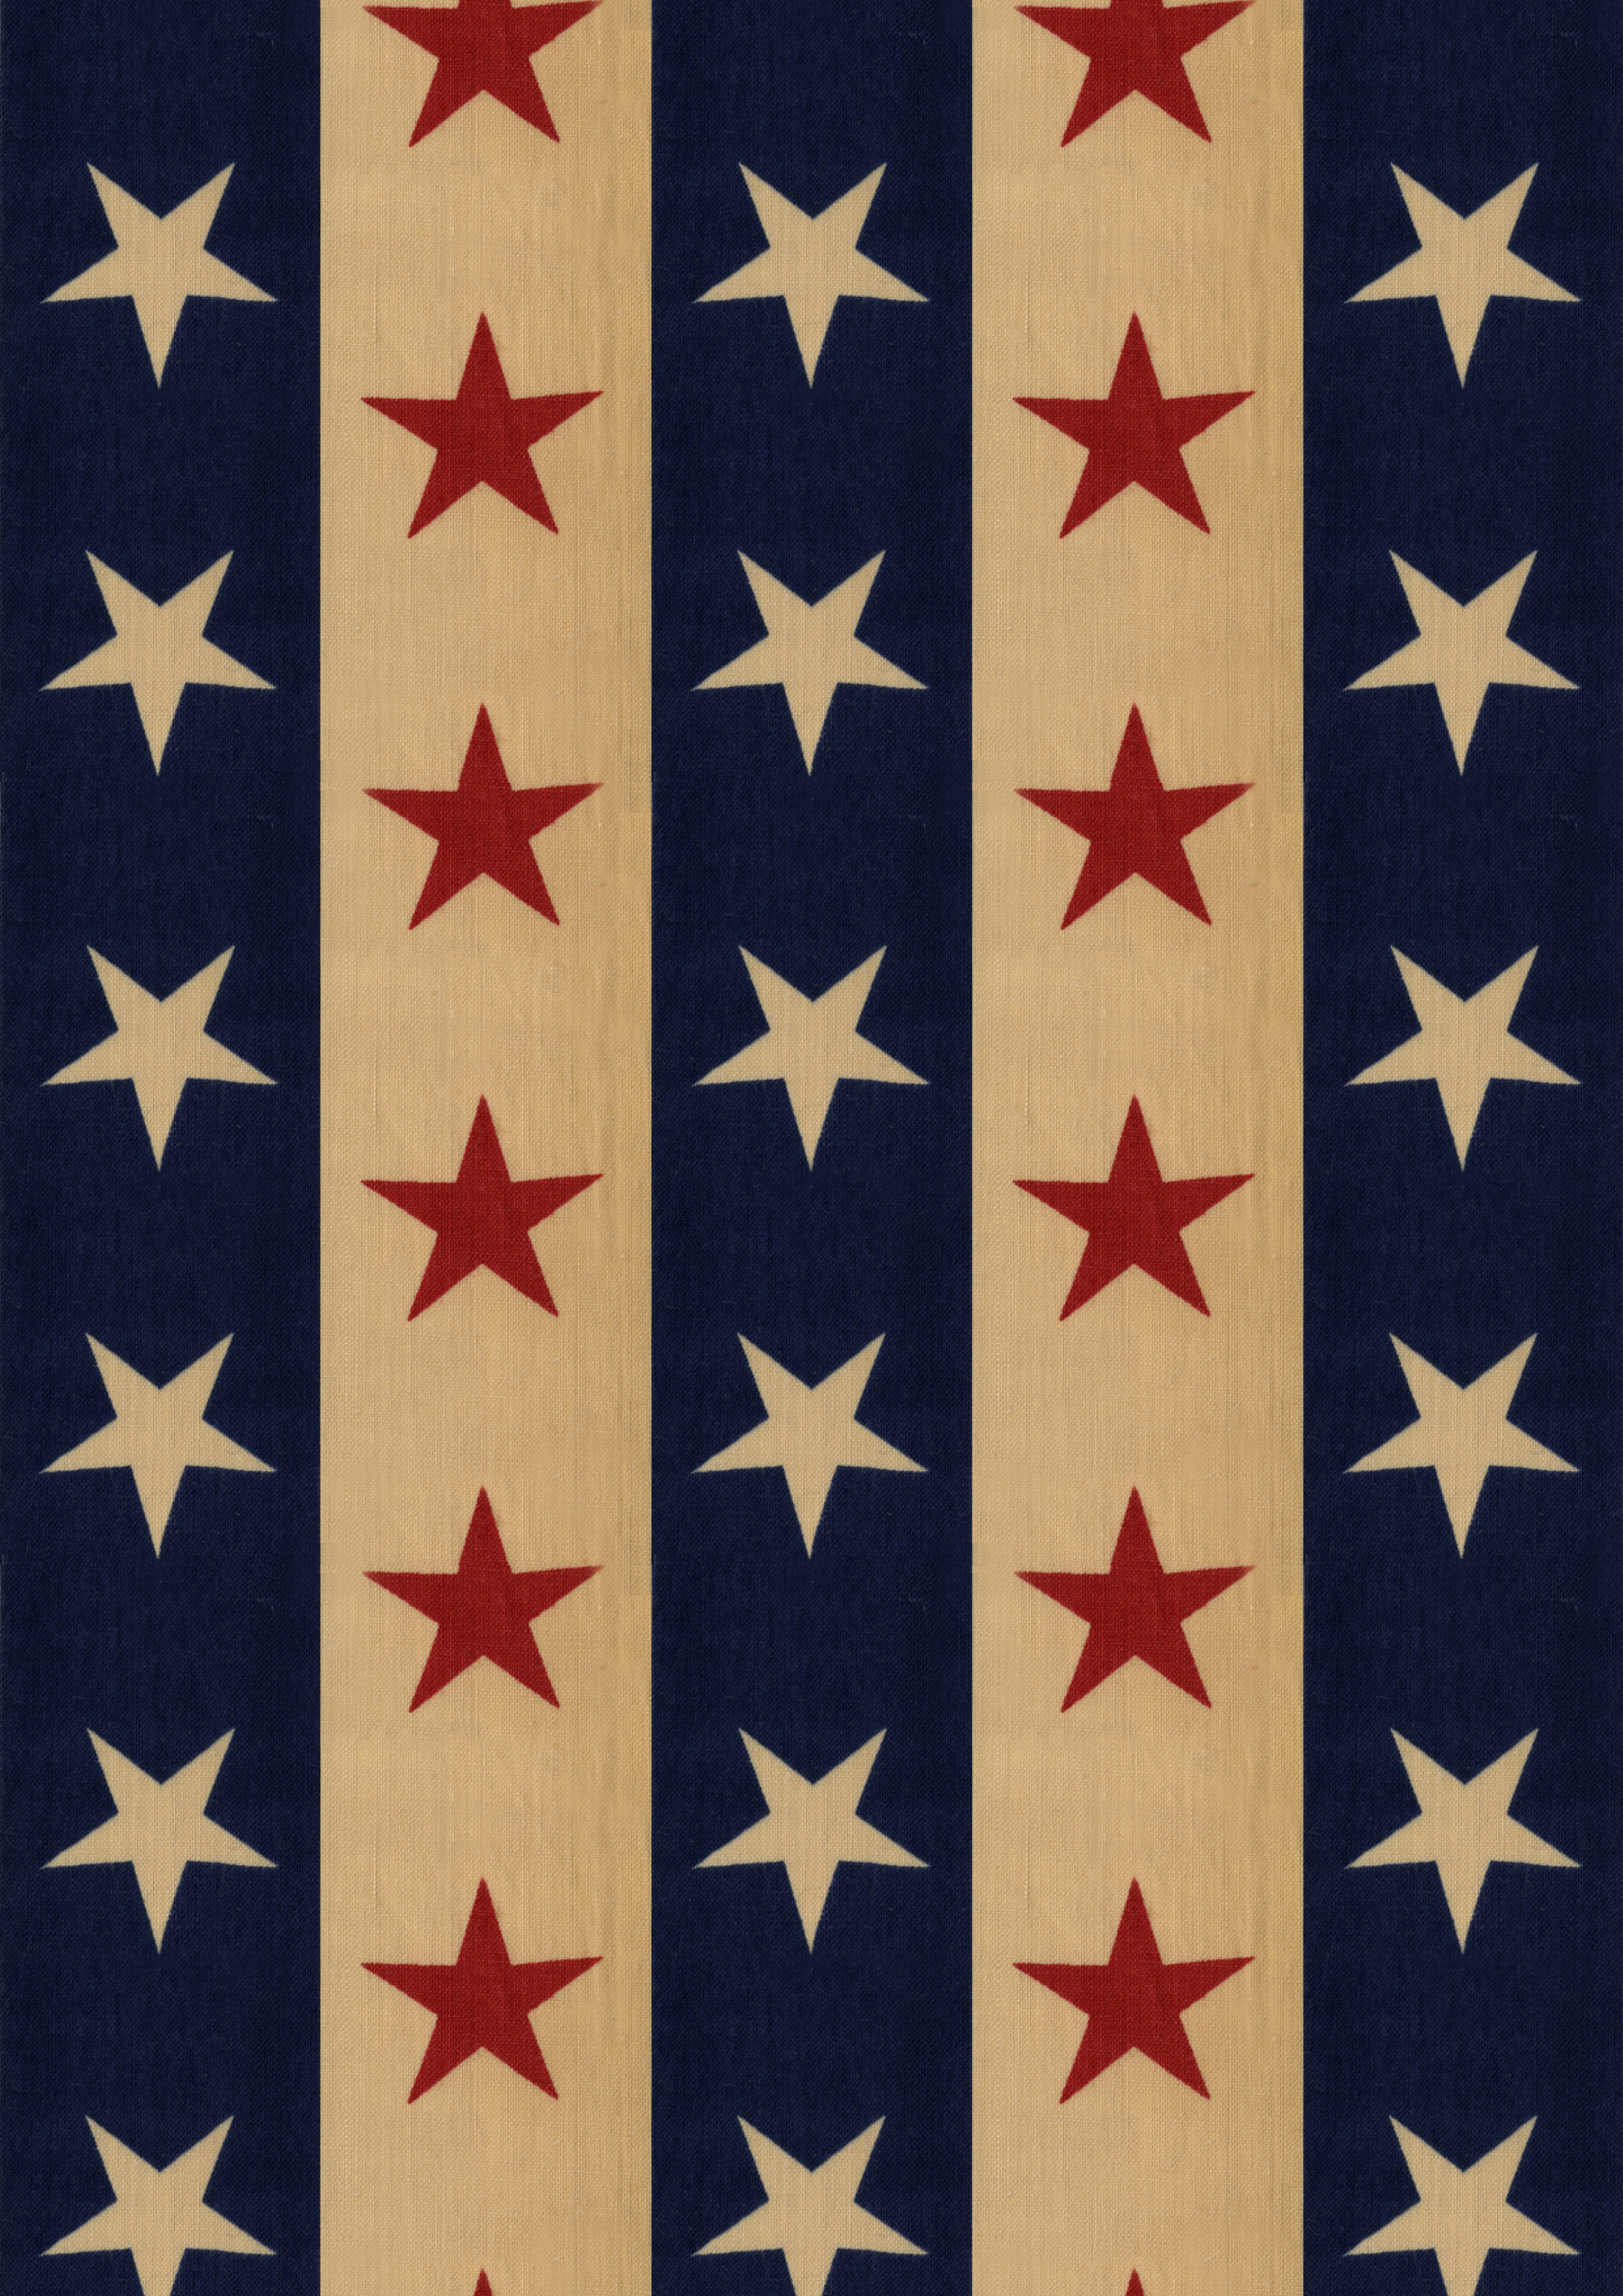 Stars And Stripes Background Free Images 1890 stars n stripes free